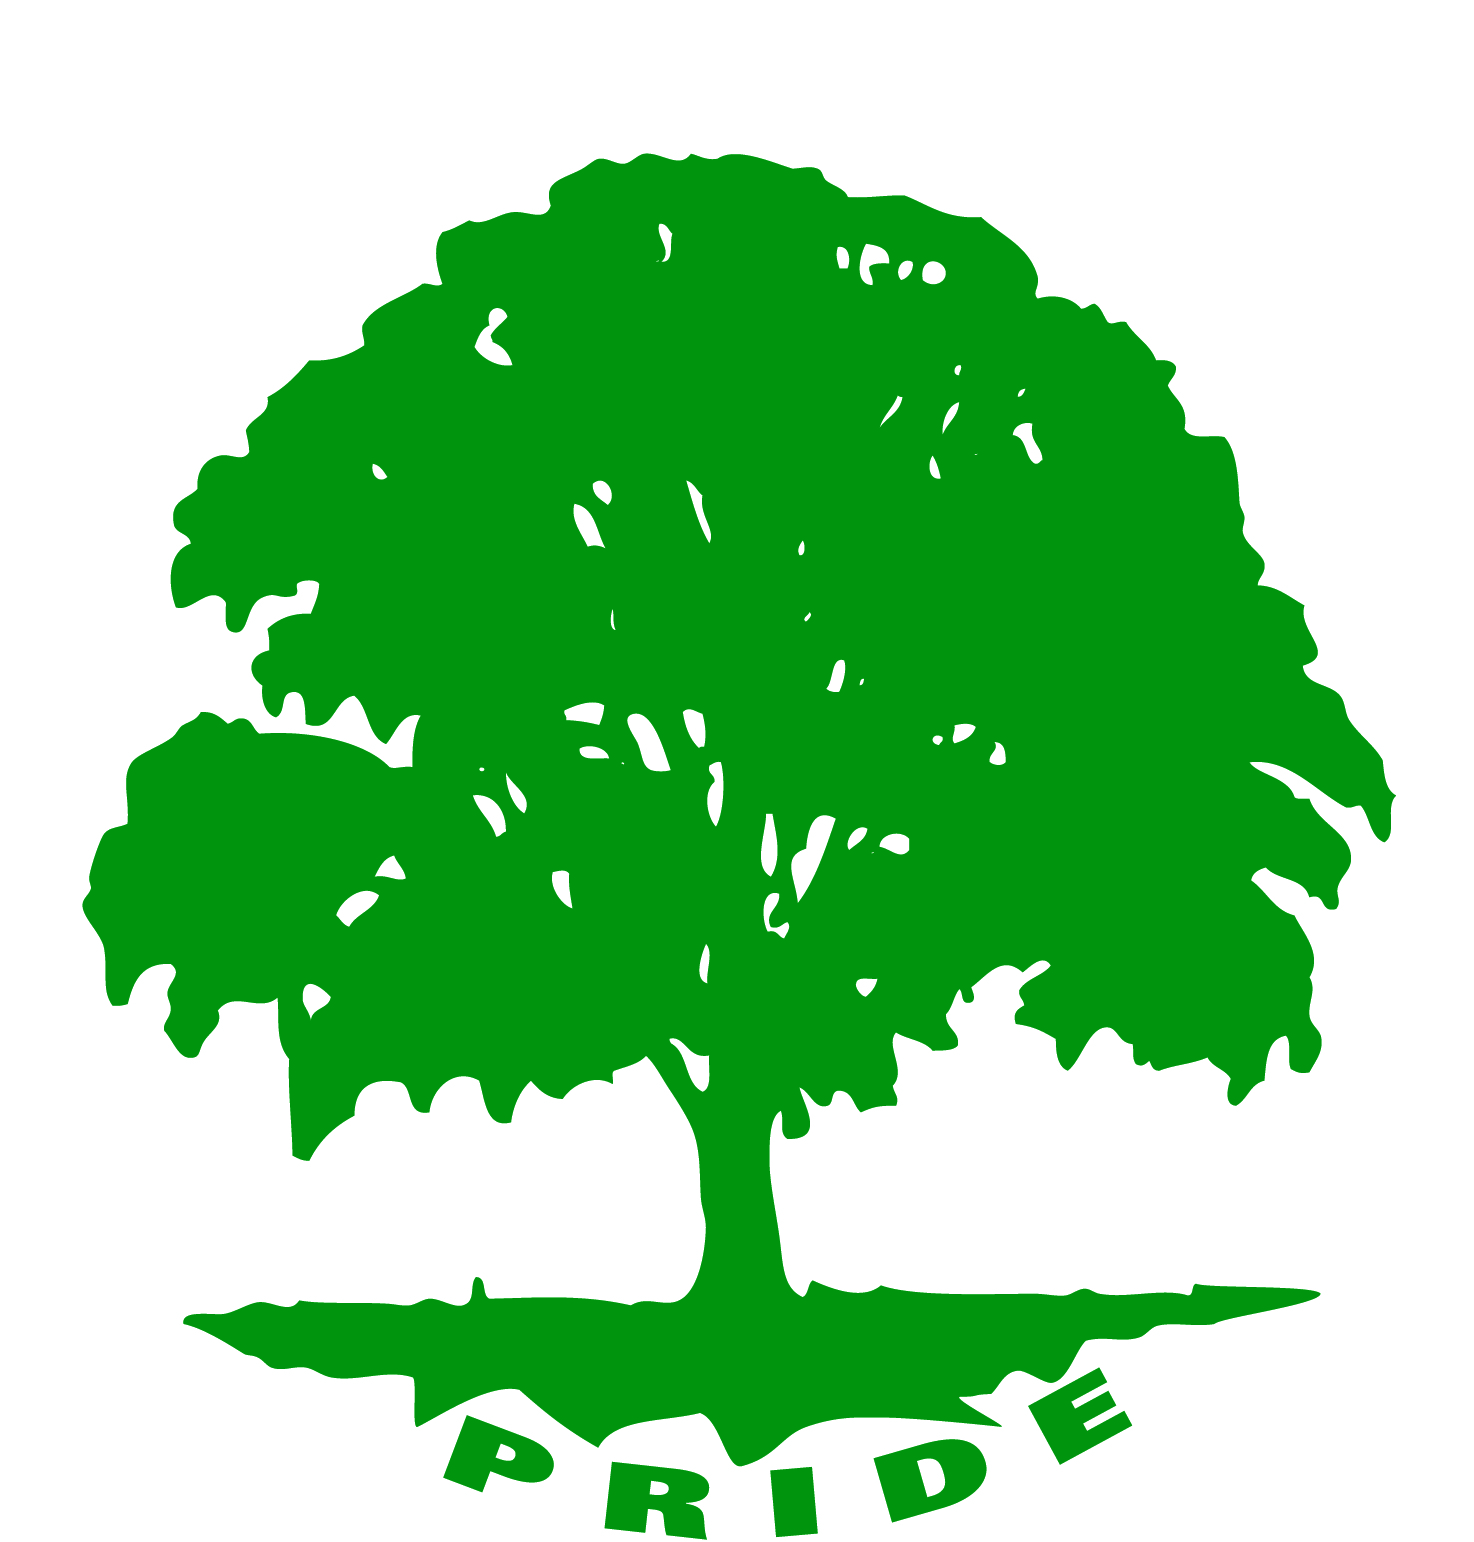 This is the F-M pride tree logo